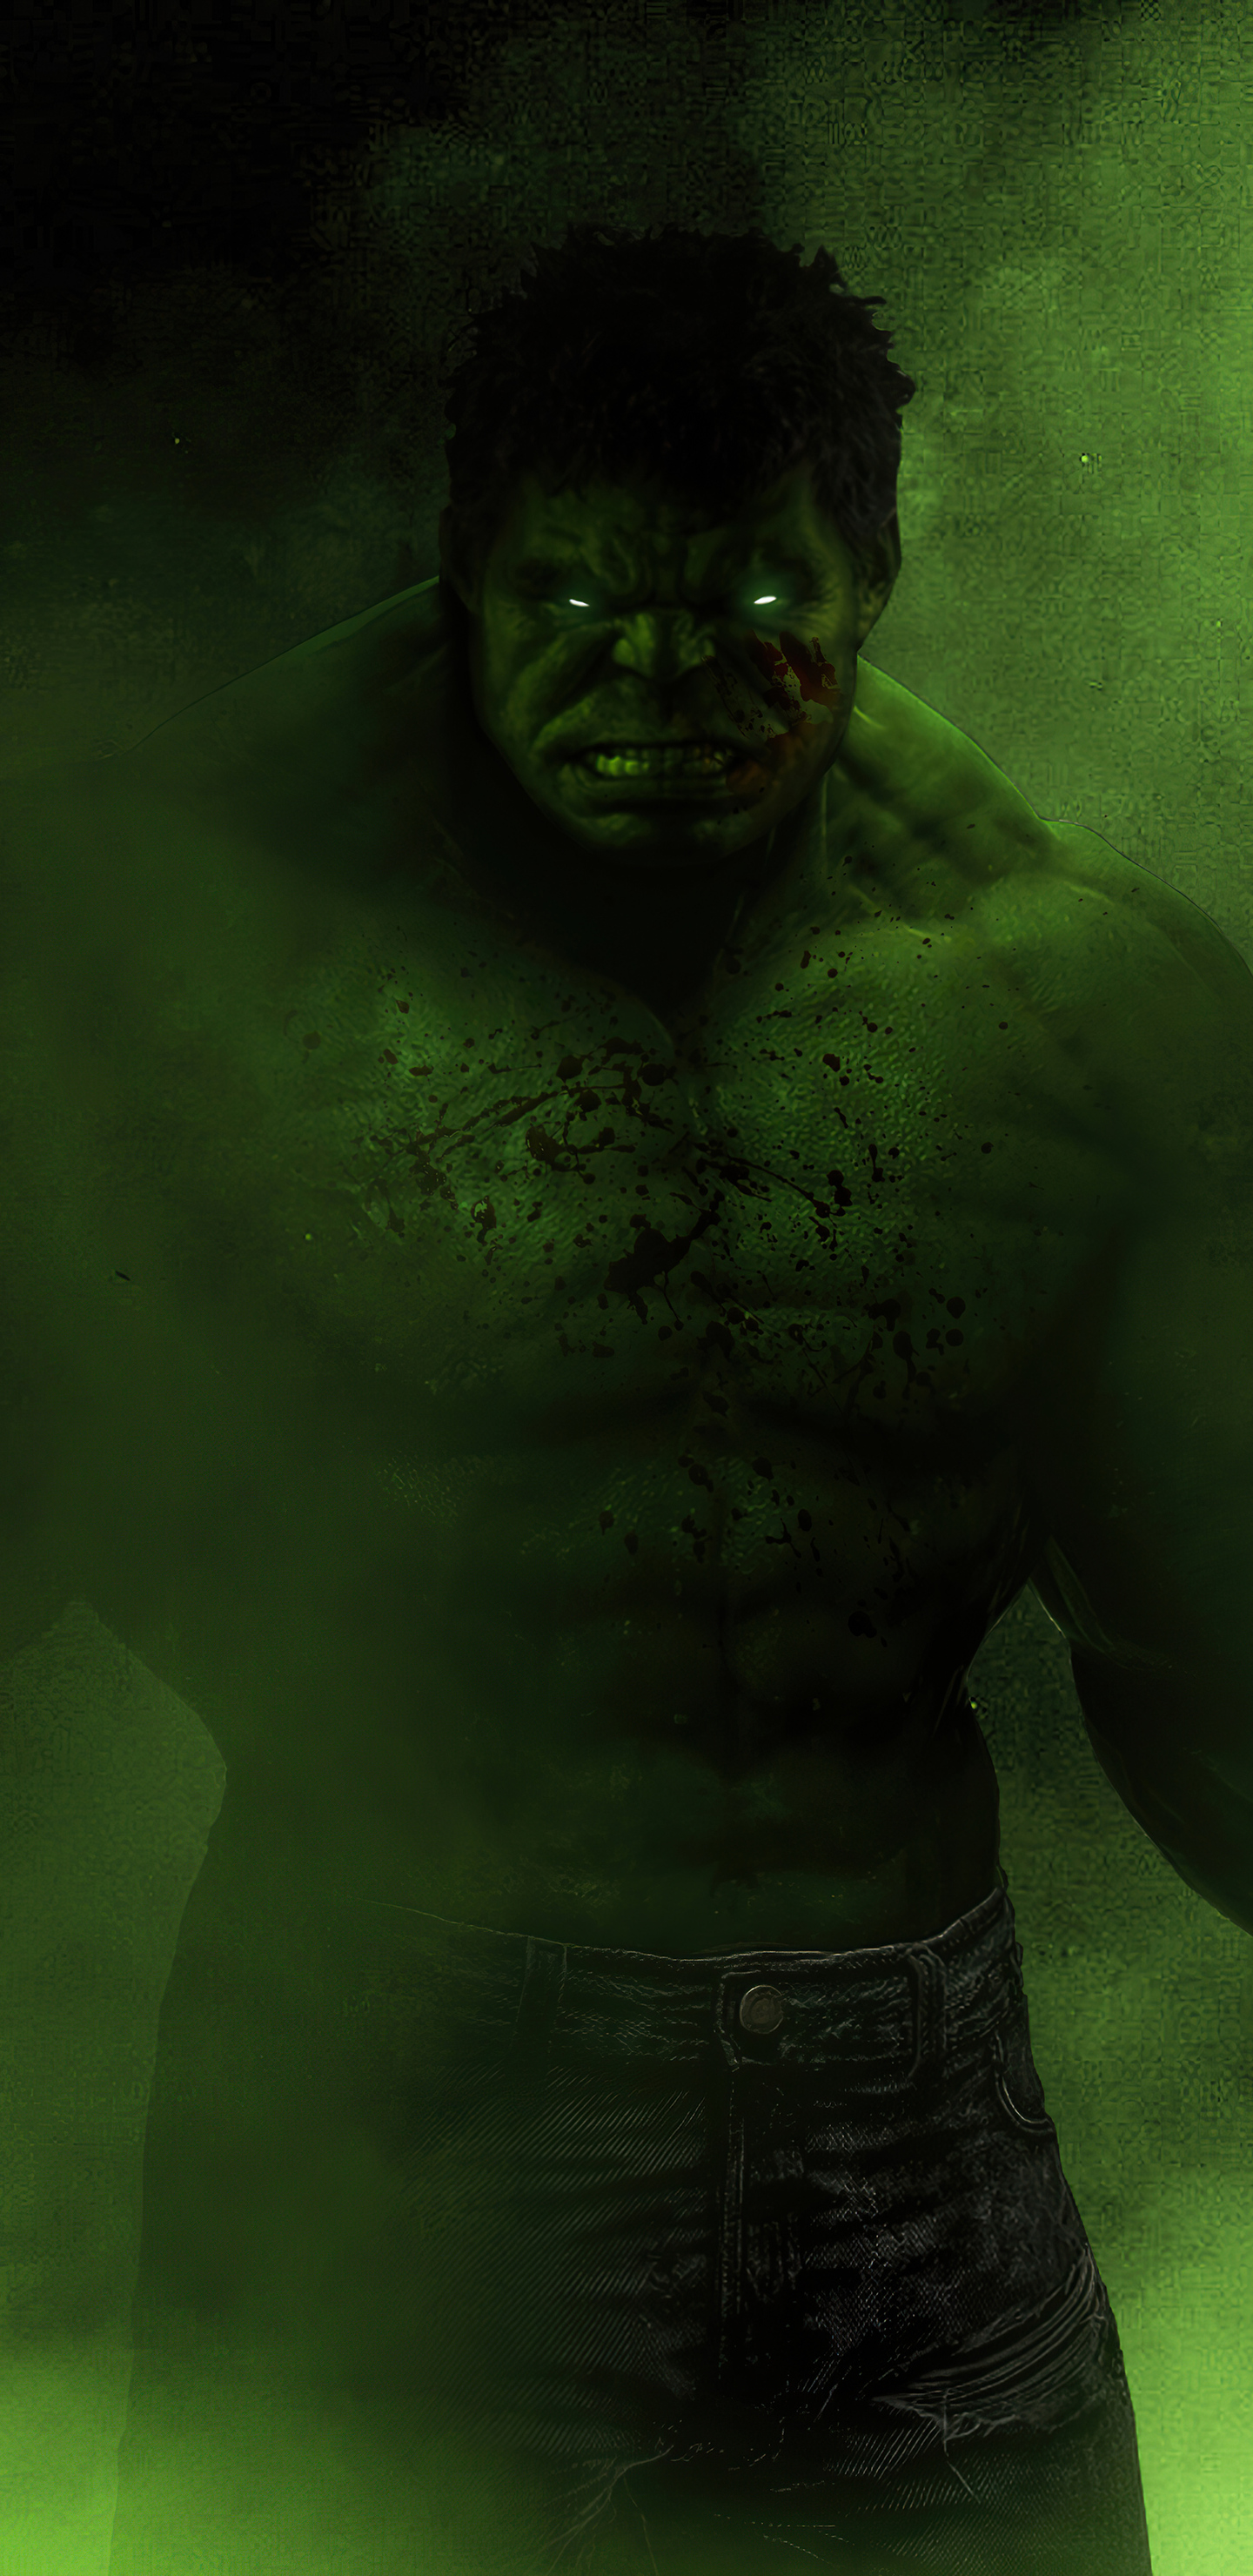 1440x2960 Incredible Hulk 4k Samsung Galaxy Note 9,8, S9,S8,S8+ QHD HD 4k  Wallpapers, Images, Backgrounds, Photos and Pictures